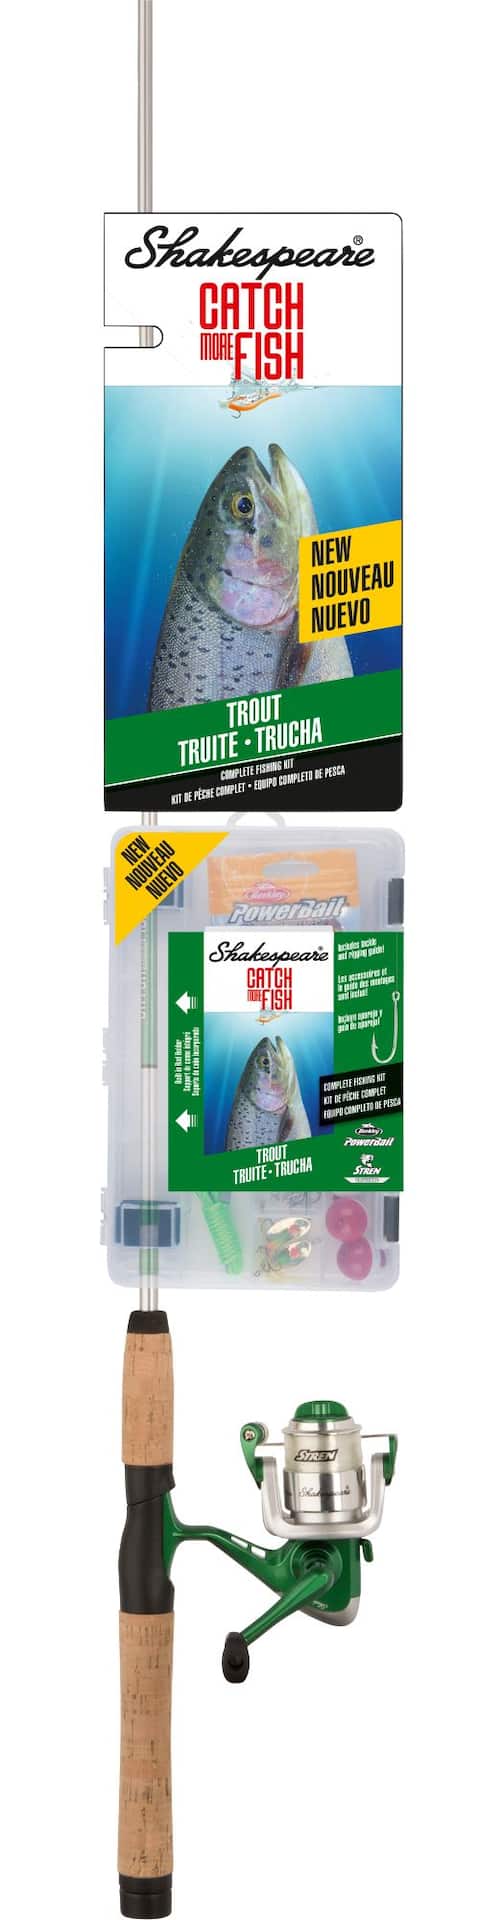 https://media-www.canadiantire.ca/product/playing/fishing/fishing-equipment/1782404/shakespeare-catch-more-fish-spinning-combo-western-trout-4040d231-0d35-4202-ae10-f559514d180a-jpgrendition.jpg